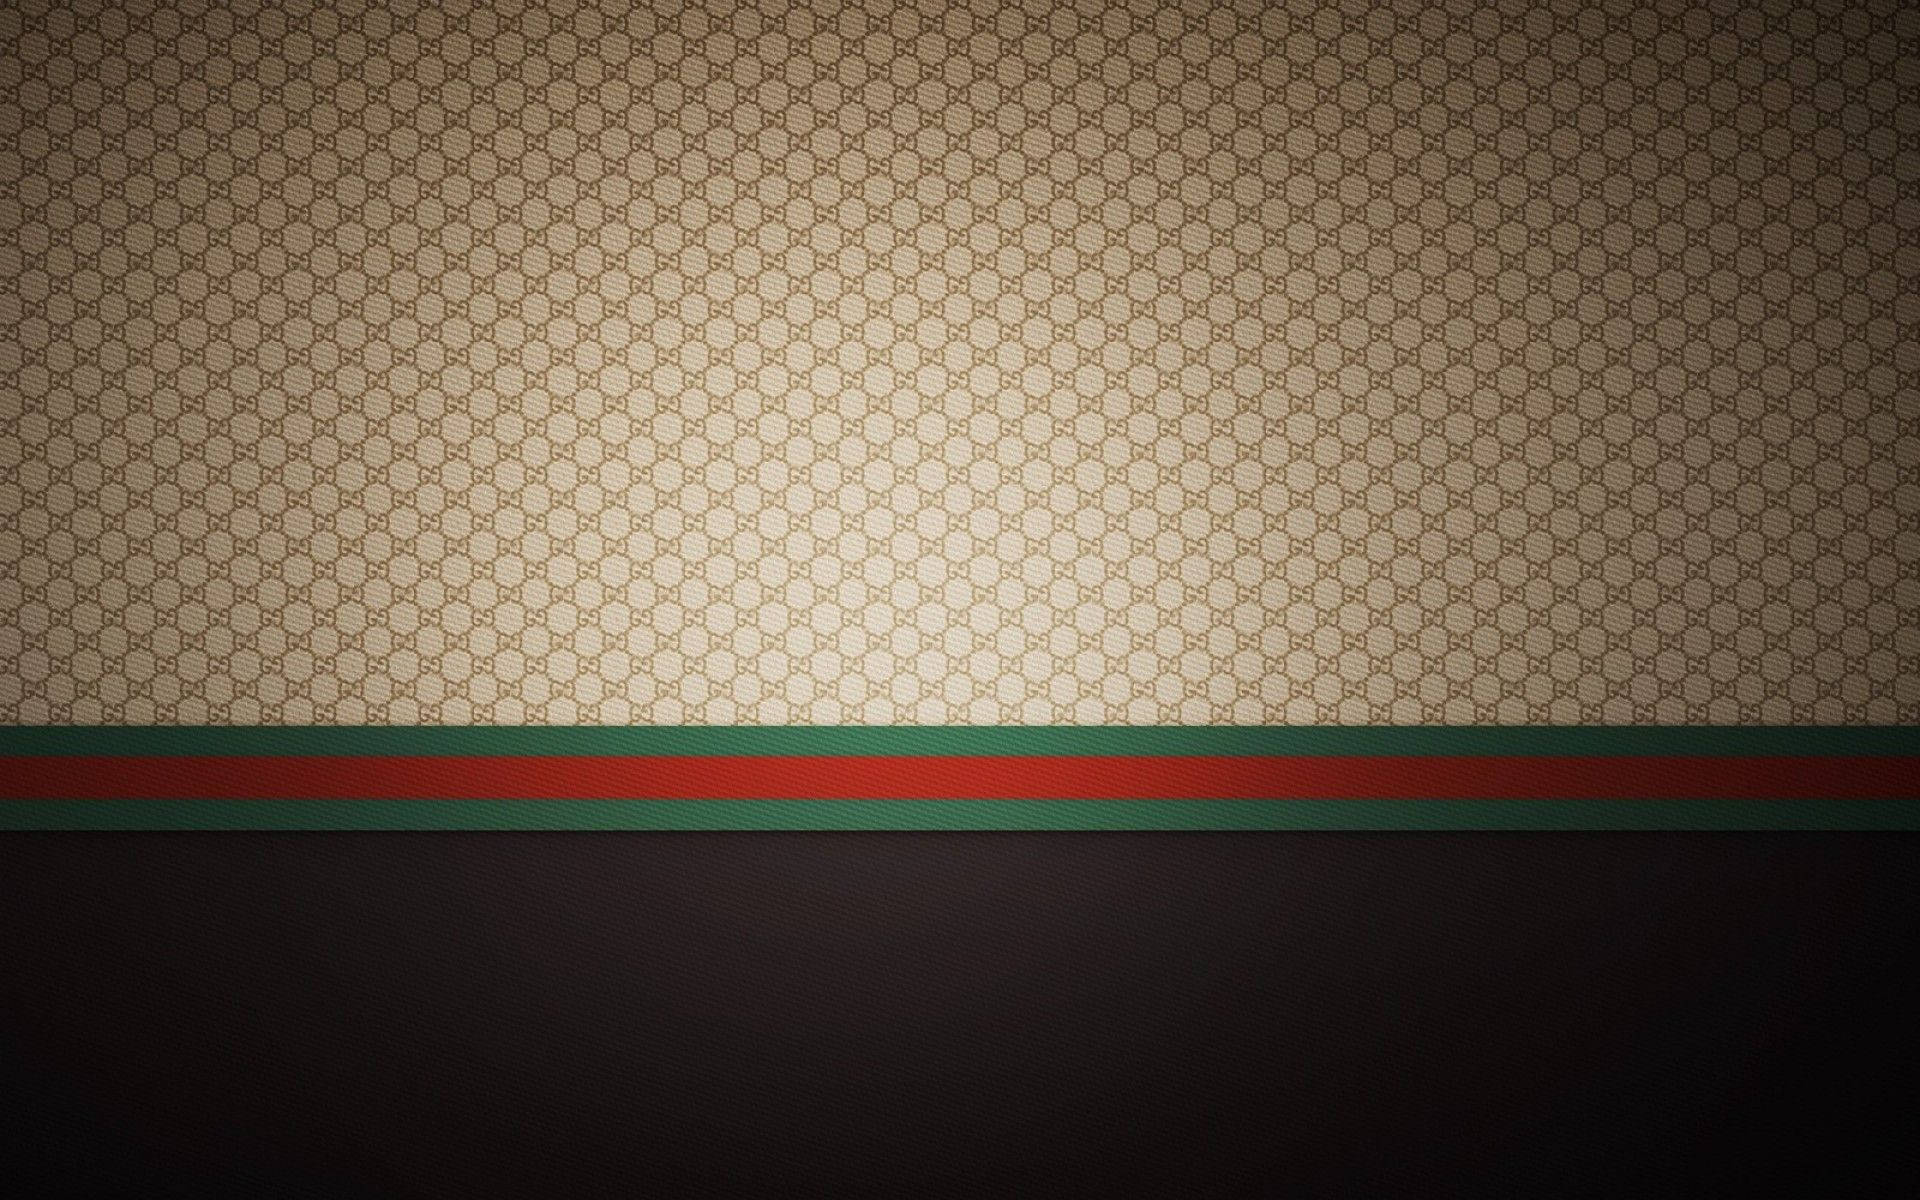 Gucci Pattern With Vignette Effect